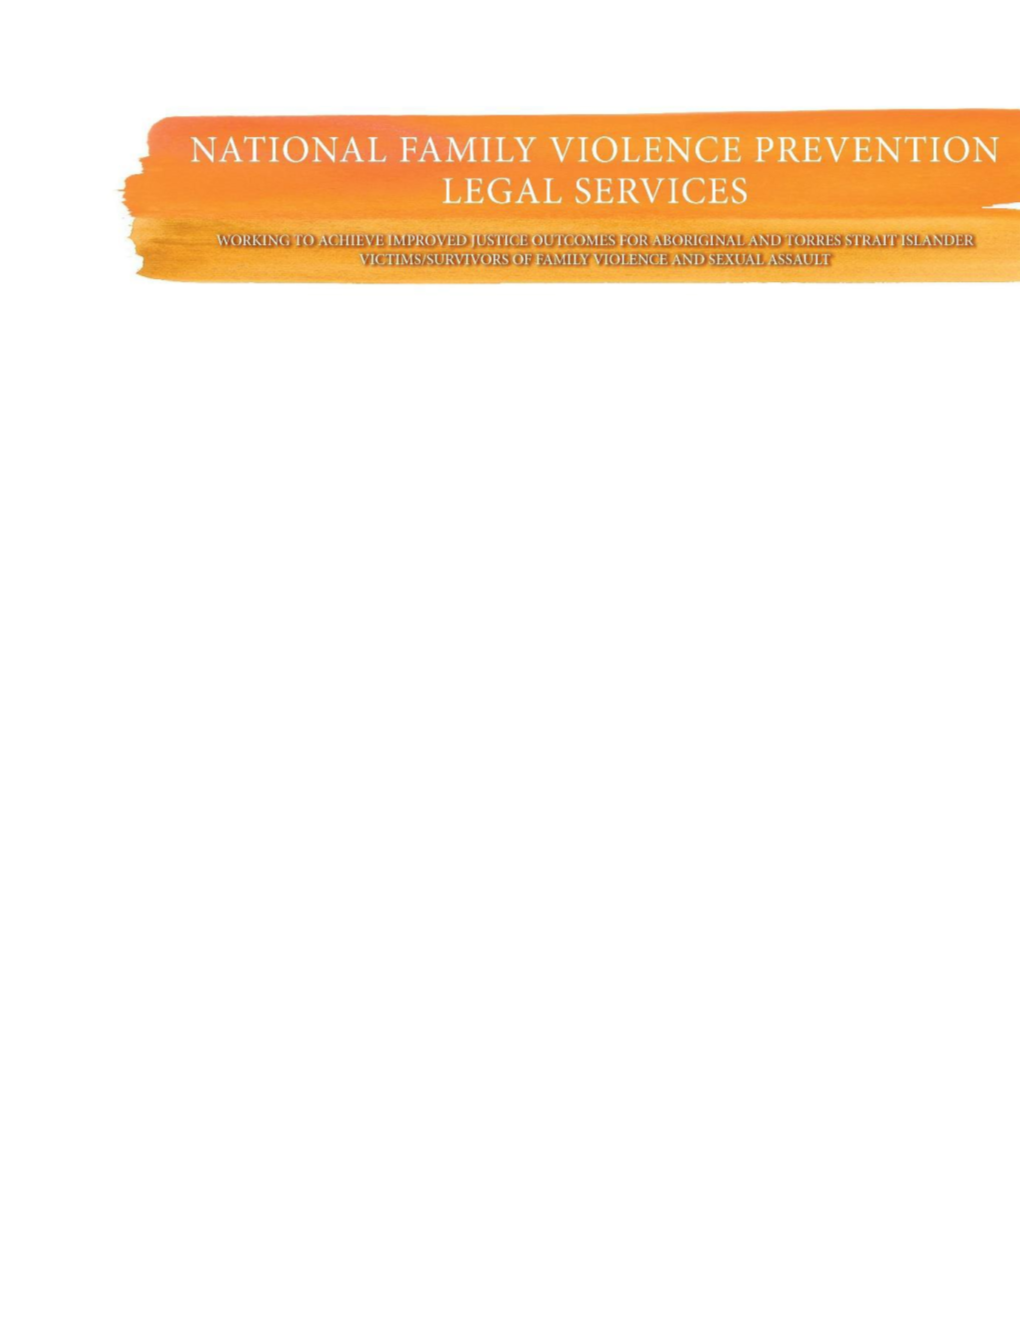 Submission - National Family Violence Prevention Legal Services